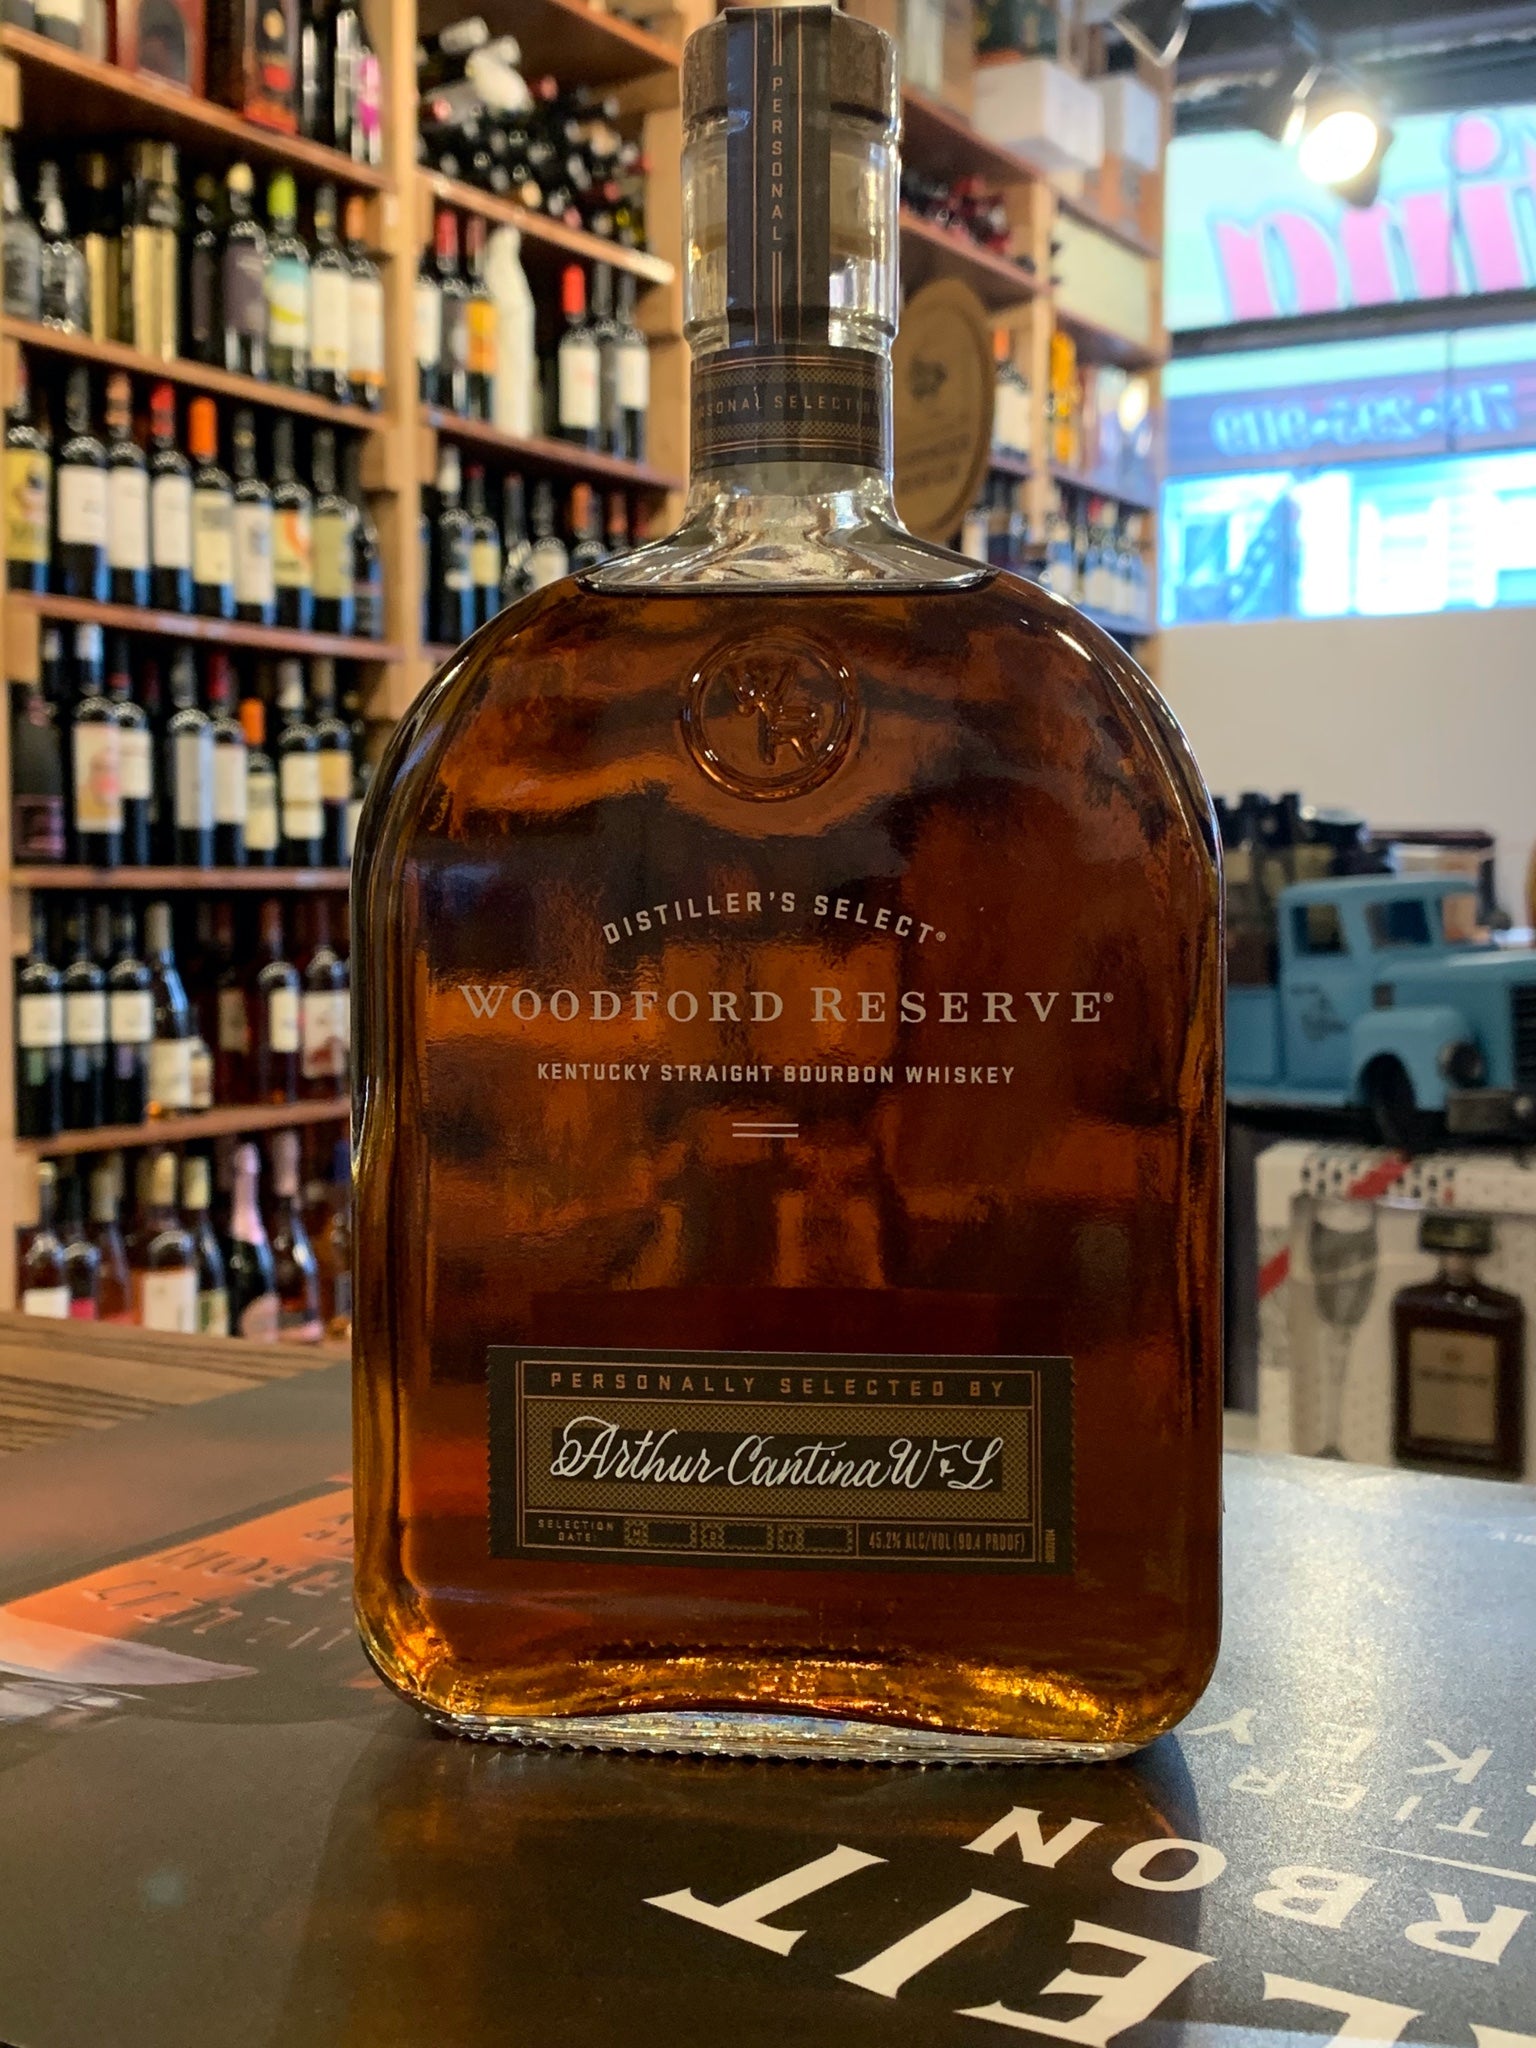 Woodford Reserve Bourbon Personal Selection 1L a flat surfaced round shouldered clear glass bottle with a brown label on the bottom and white lettering on the front and a wooden top